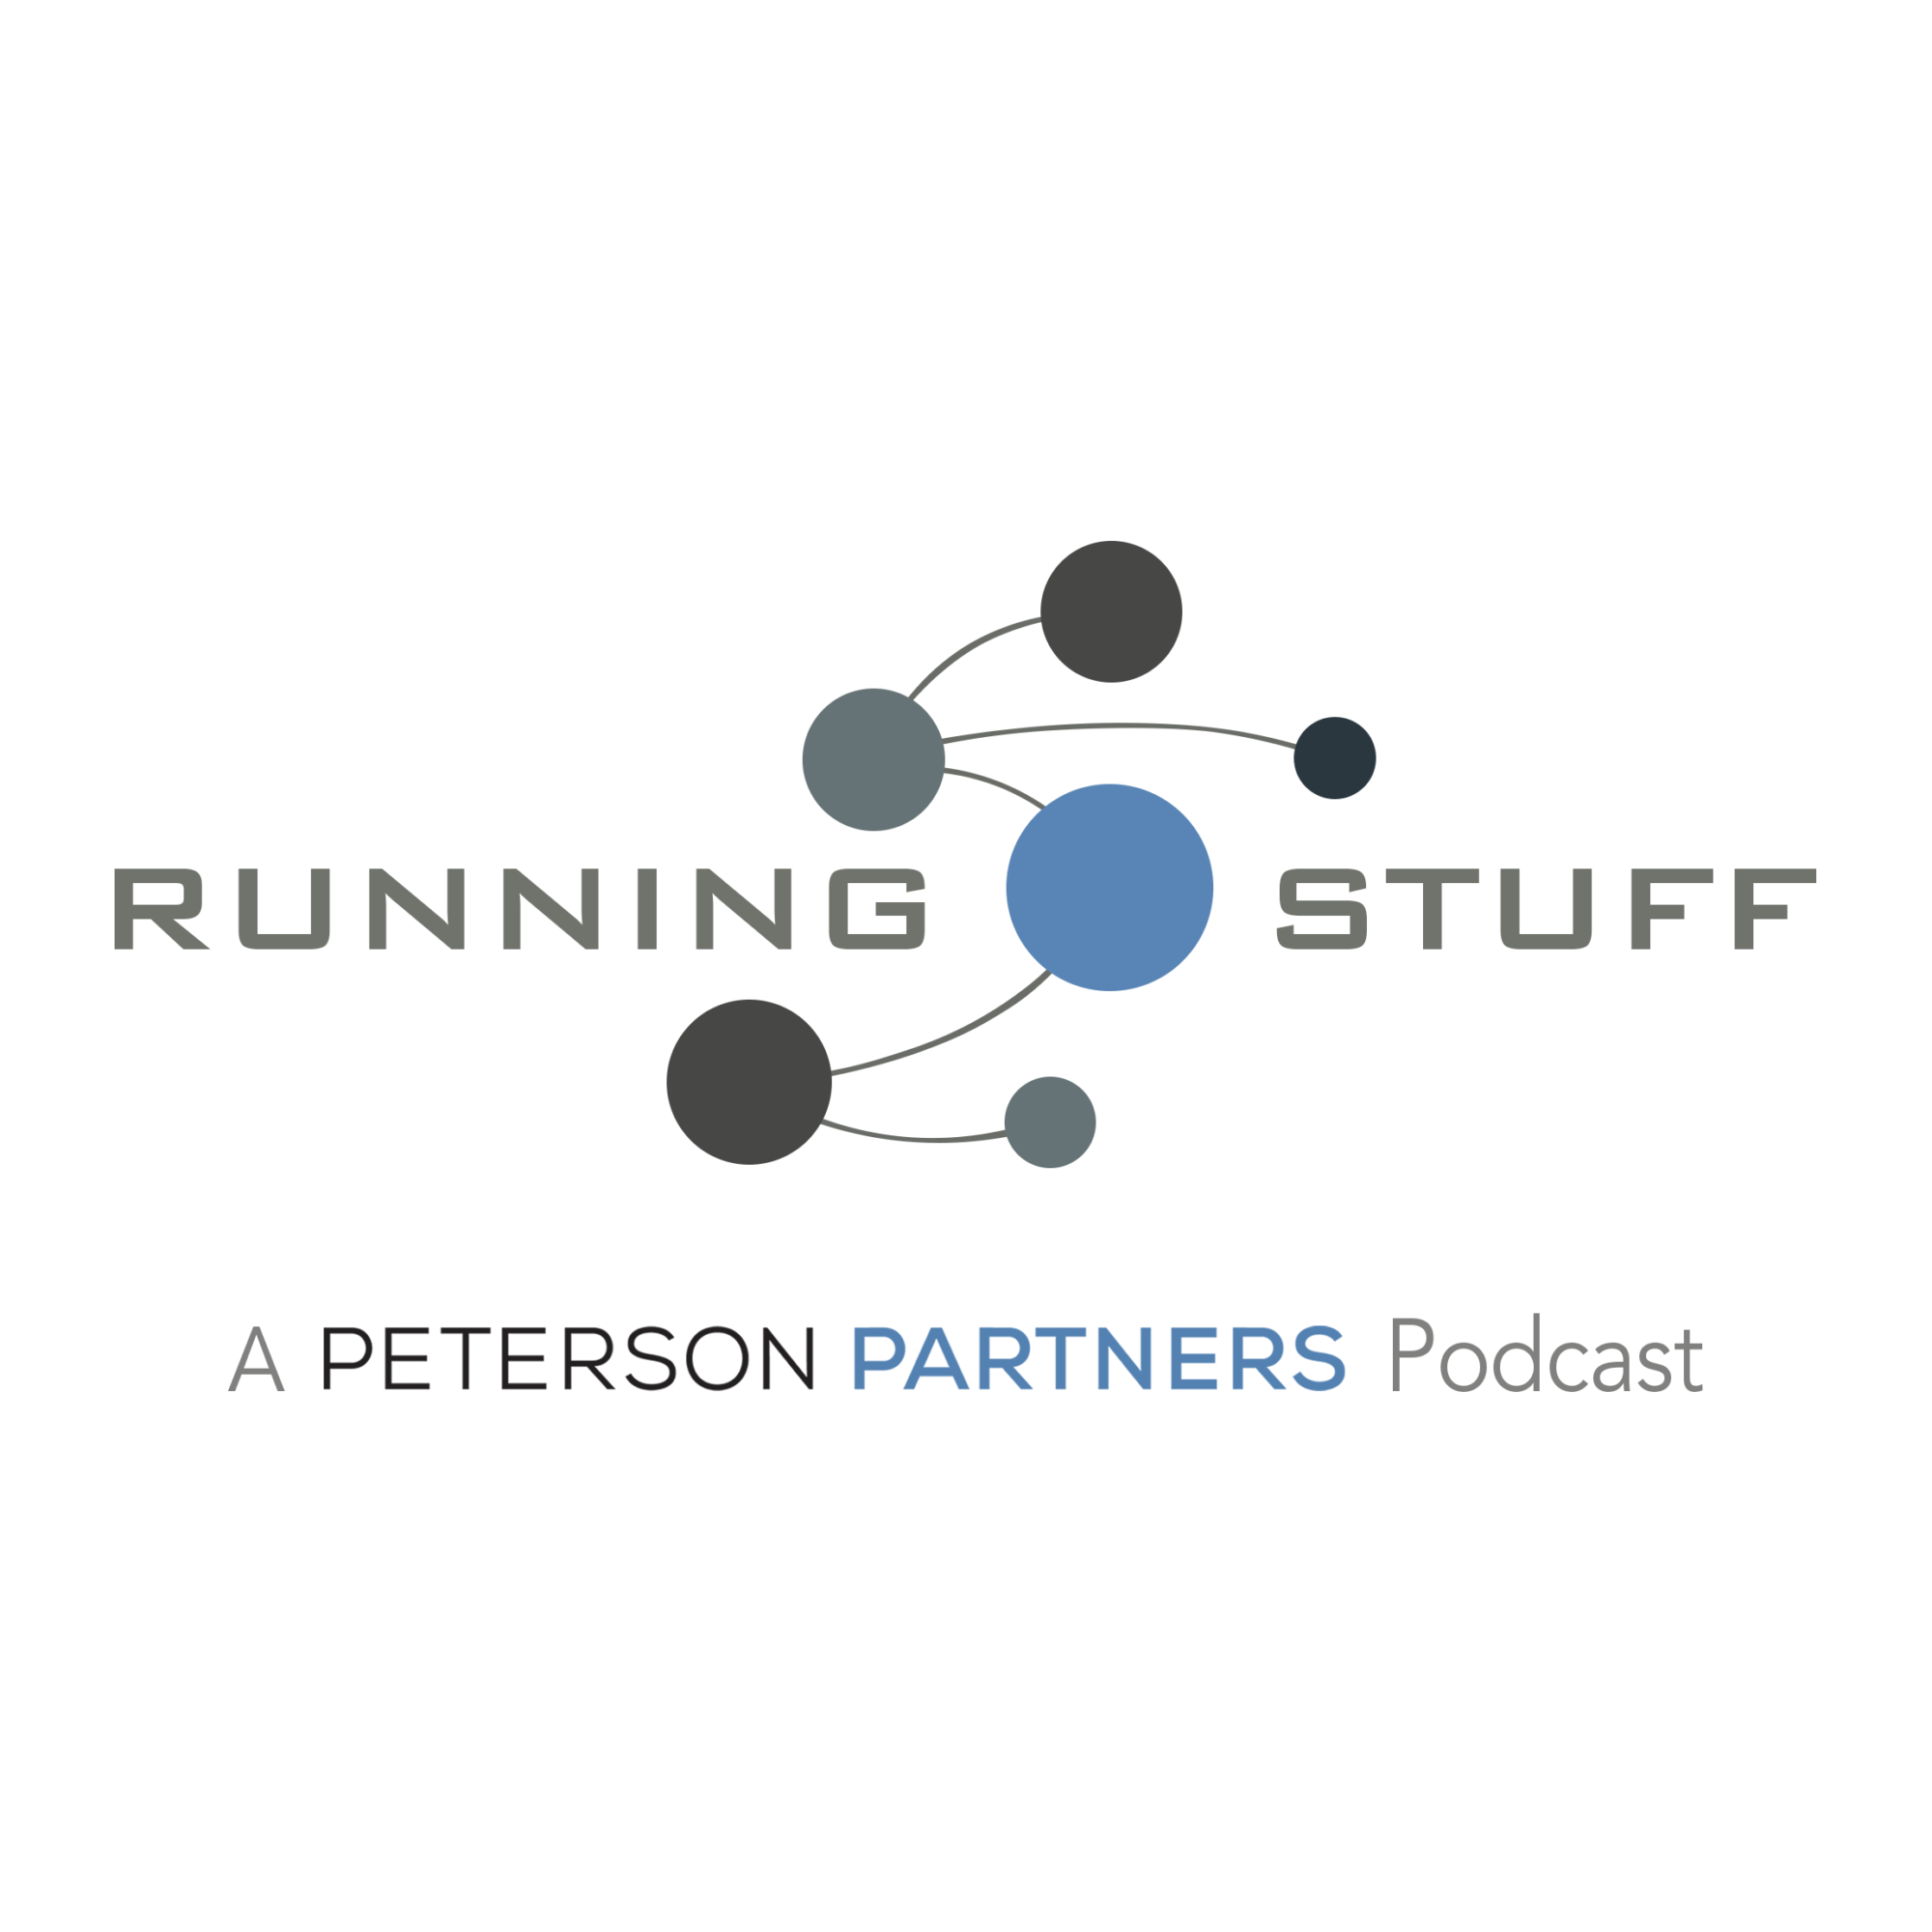 Running Stuff, a Peterson Partners Podcast